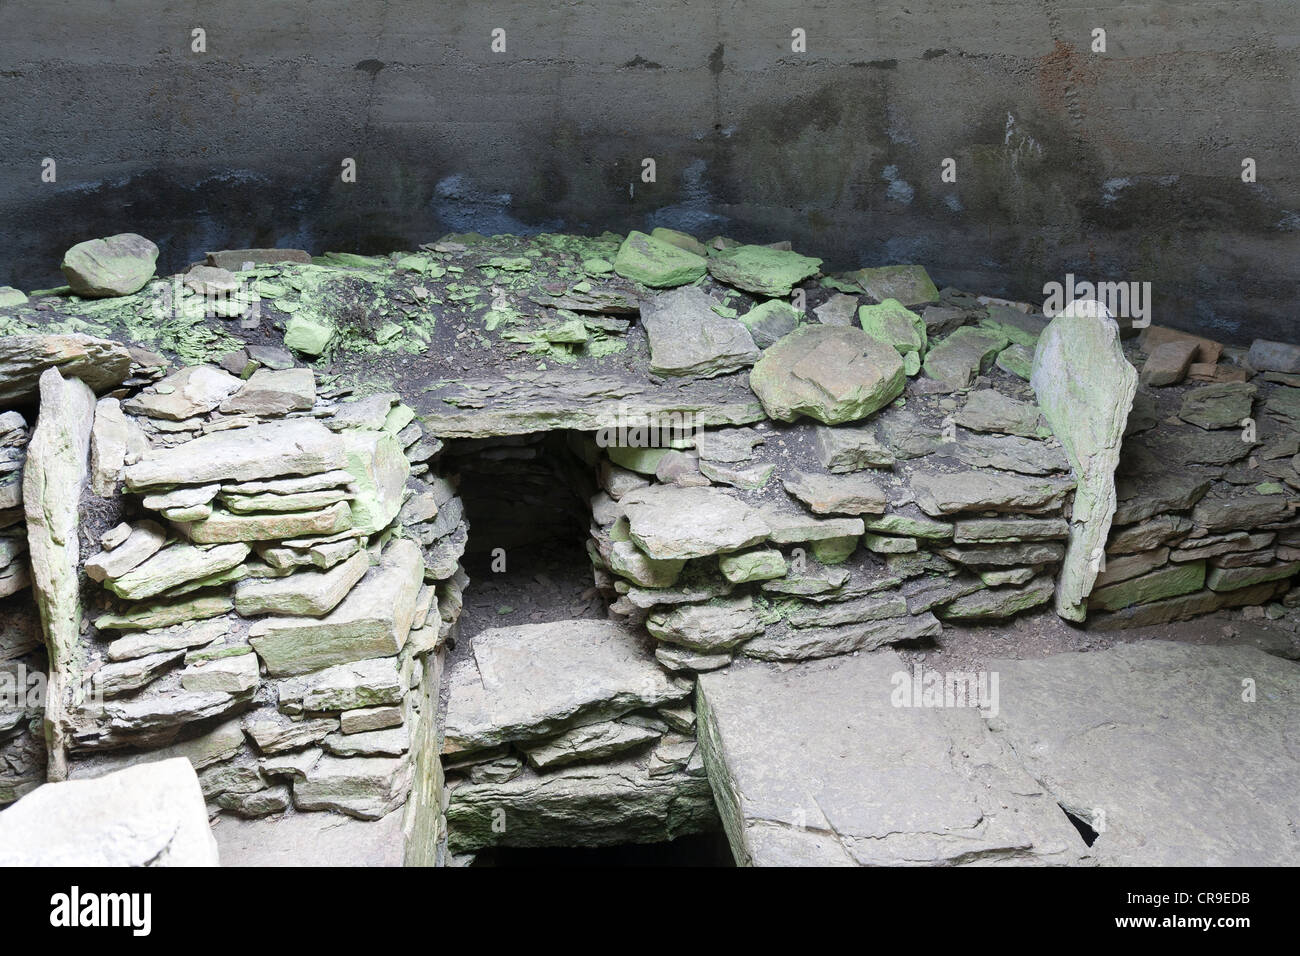 The Island of Rousay - Orkney Islands, Scotland with a Neolithic burial chamber Stock Photo